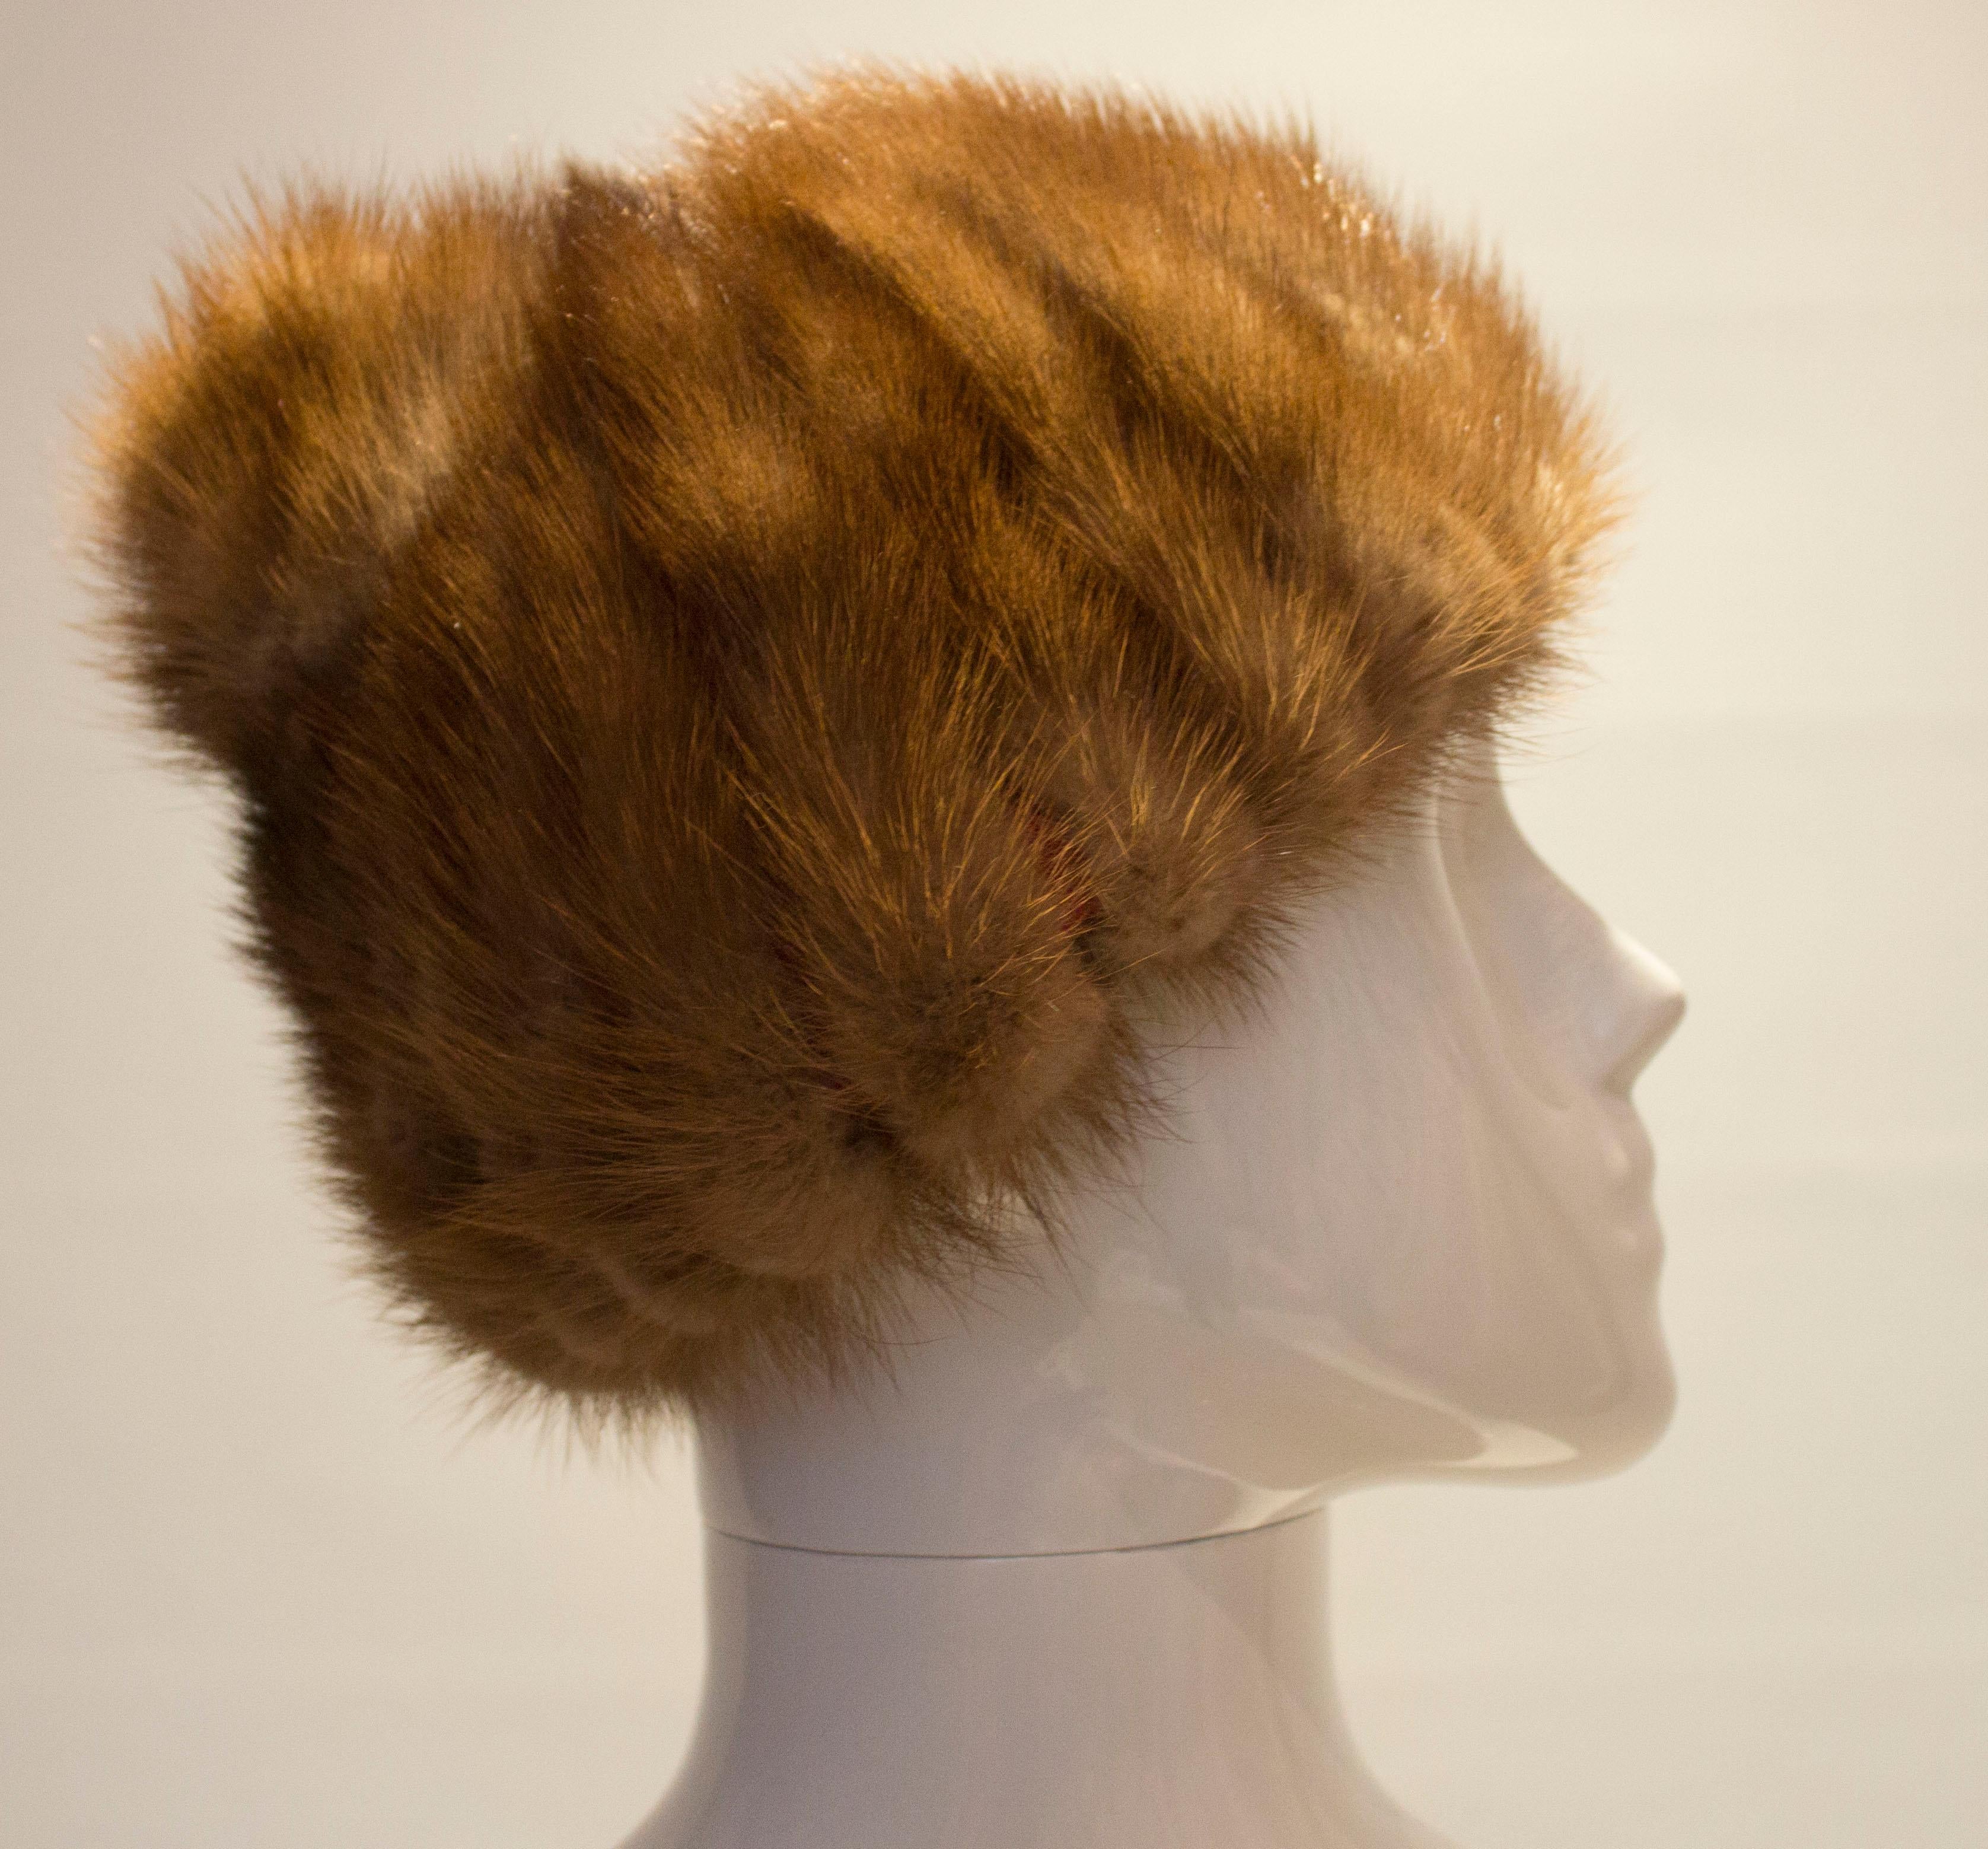 A cute and warm mink hat, good for the cold weather. In a lovely light brown colour , the hat has an inner circumference of 22''.